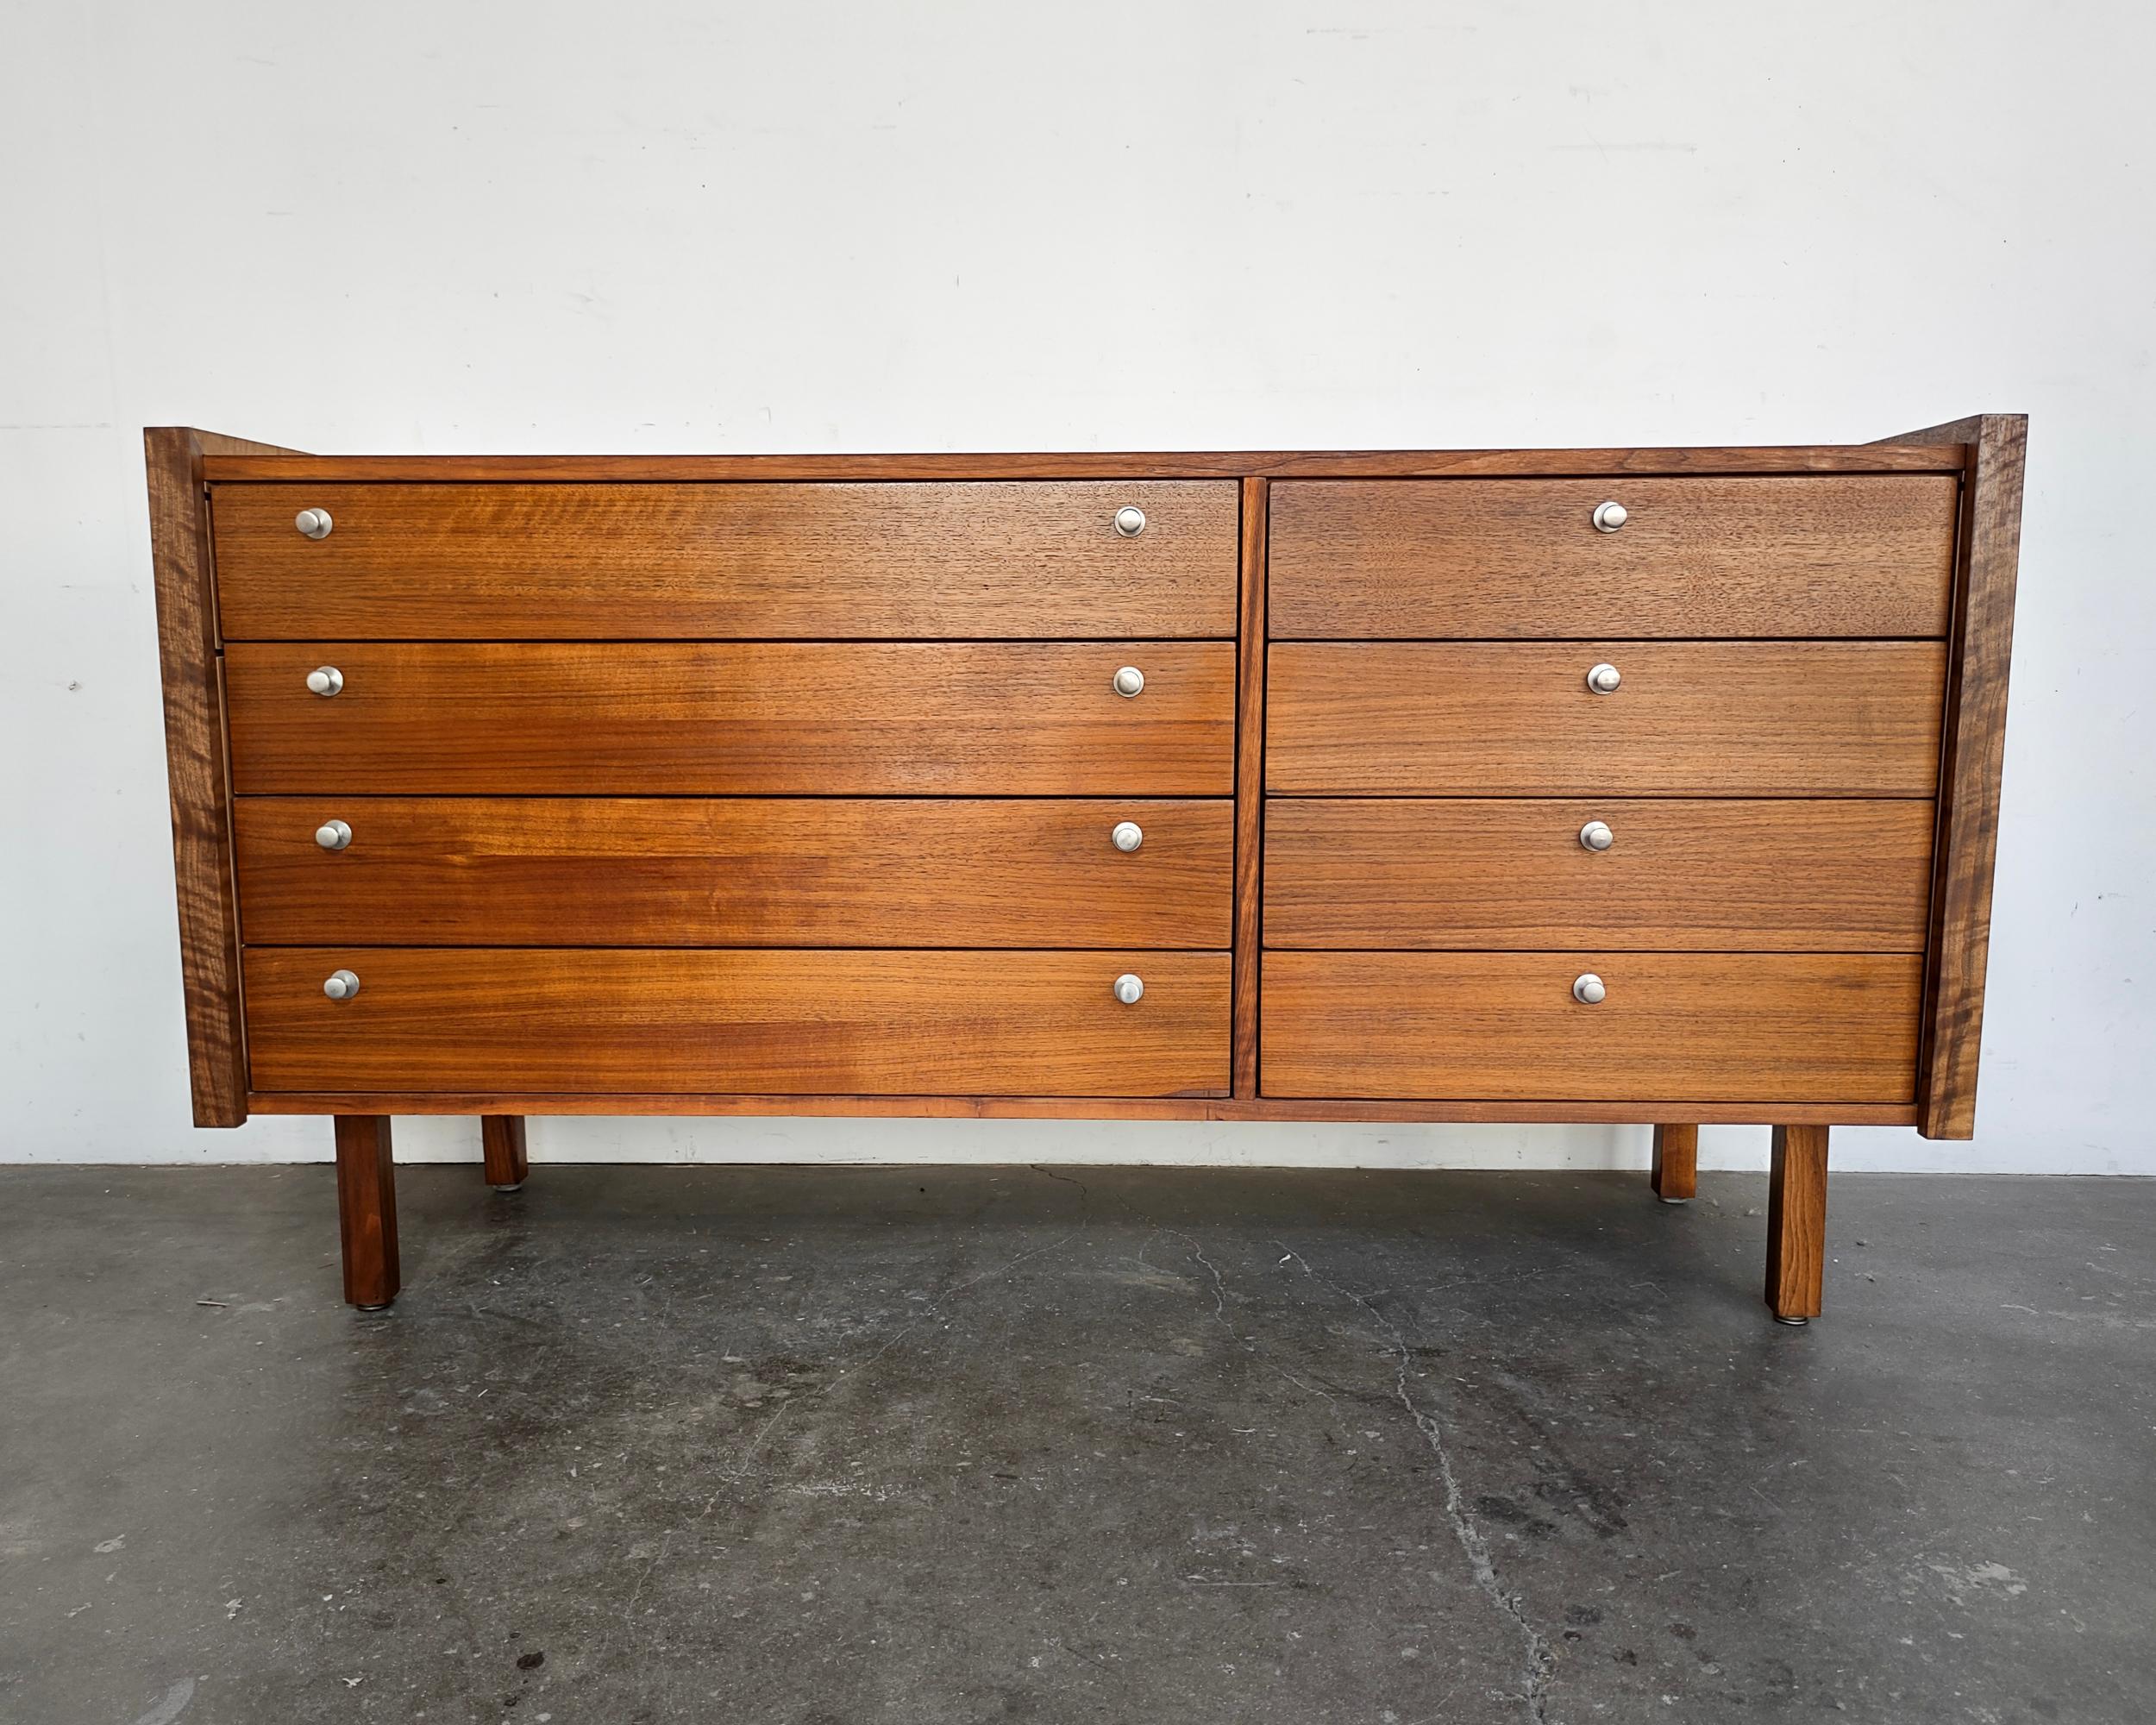 Unique walnut dresser by Martin Borenstein for Brown Saltman, circa 1960. Beautifully refinished walnut grain with original hardware. Matching small dresser in a separate listing. Overall great restored condition, there are some defects on the top